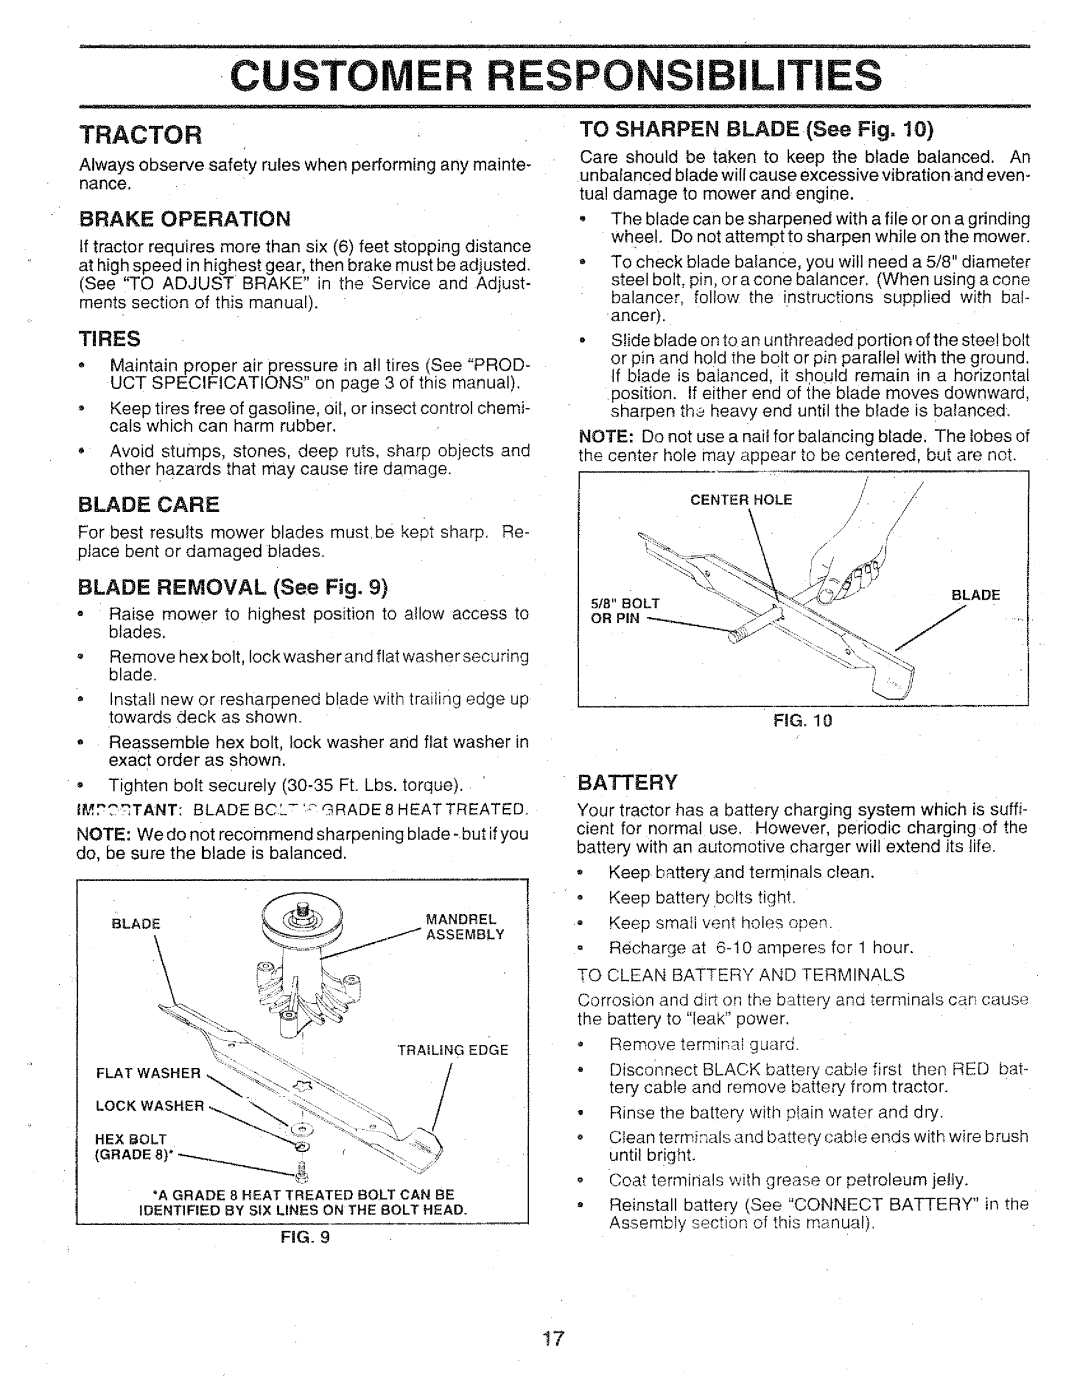 Sears 917.25147 Customer Responsibilities, Tractor, Brake Operation, Blade Care, BLADE REMOVAL See Fig, Battery 